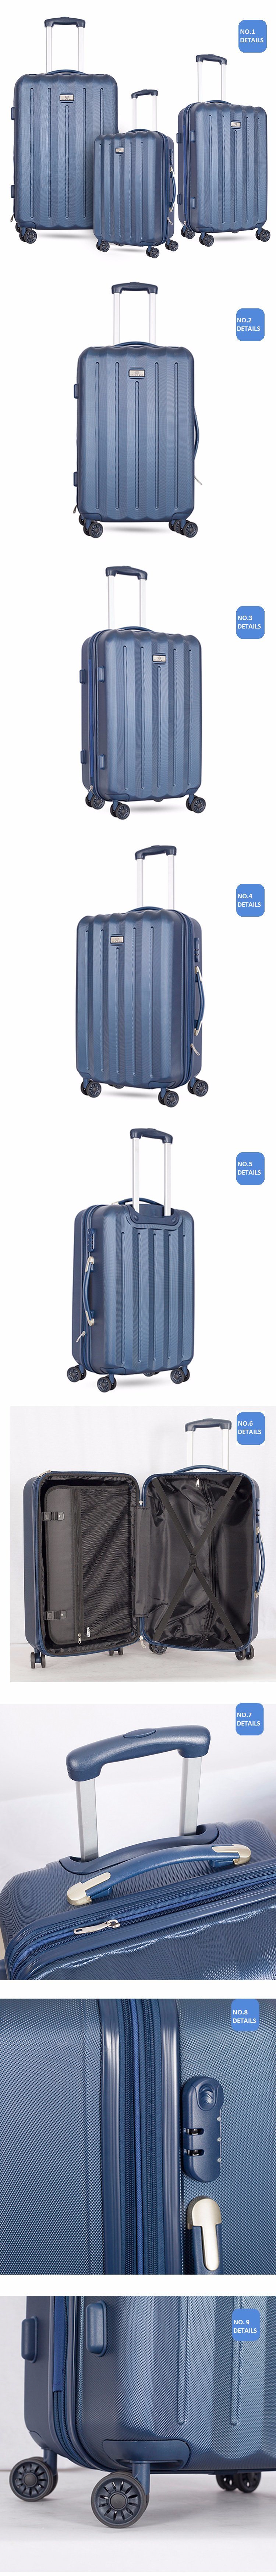 2018 Fashion 20/24/28 ABS Inch Trolley Travel Luggage Suitcase